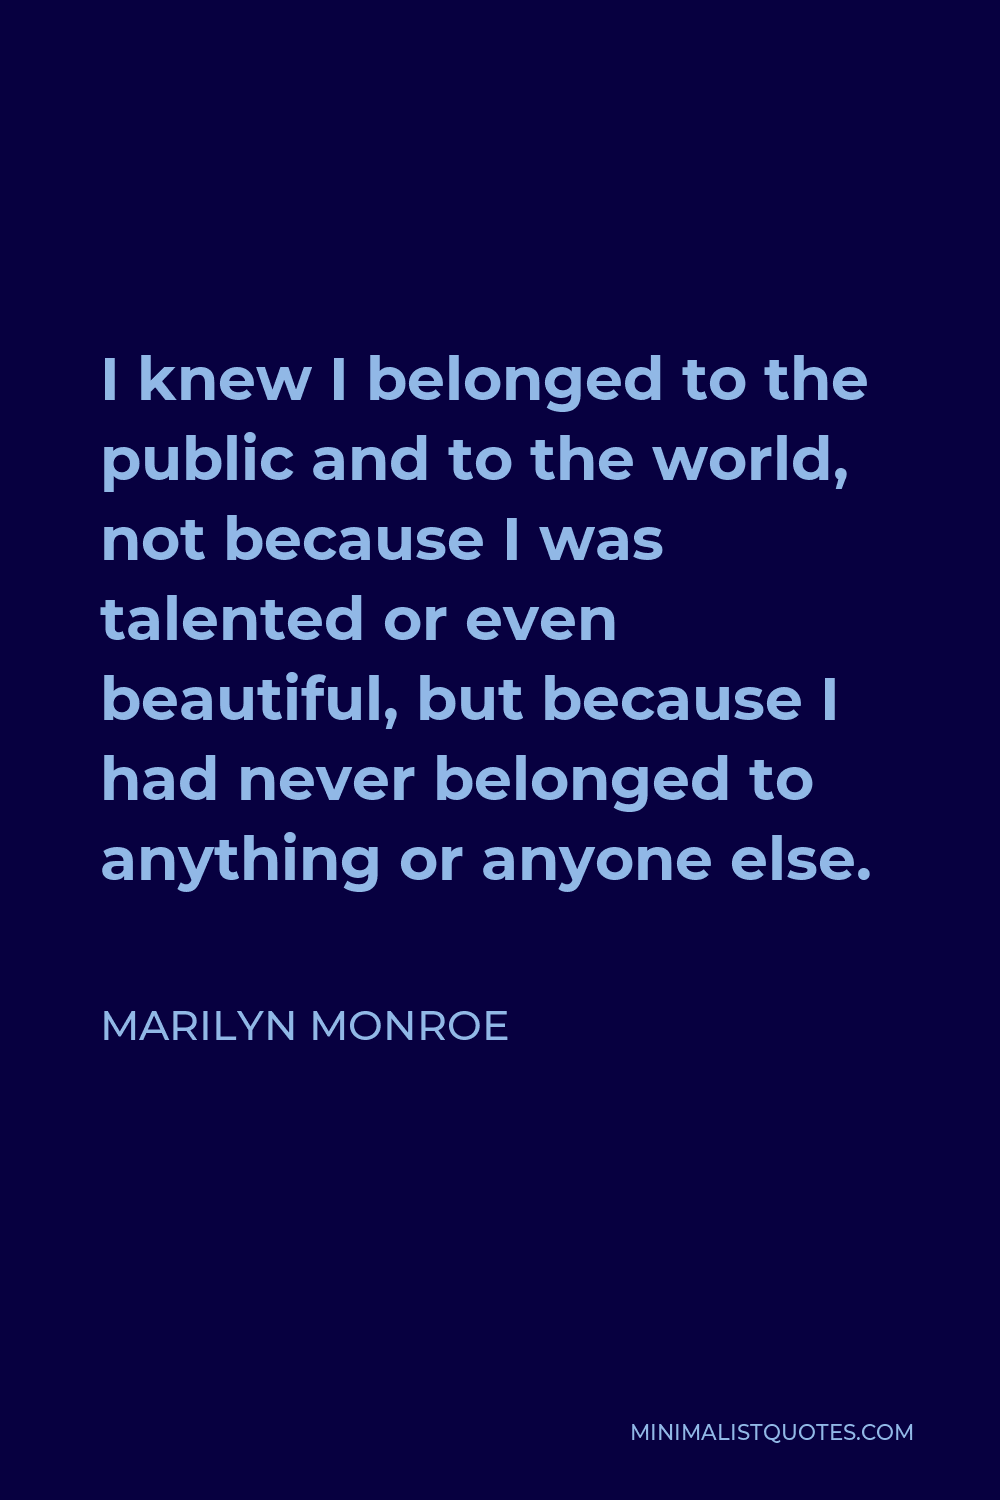 Marilyn Monroe Quote - I knew I belonged to the public and to the world, not because I was talented or even beautiful, but because I had never belonged to anything or anyone else.